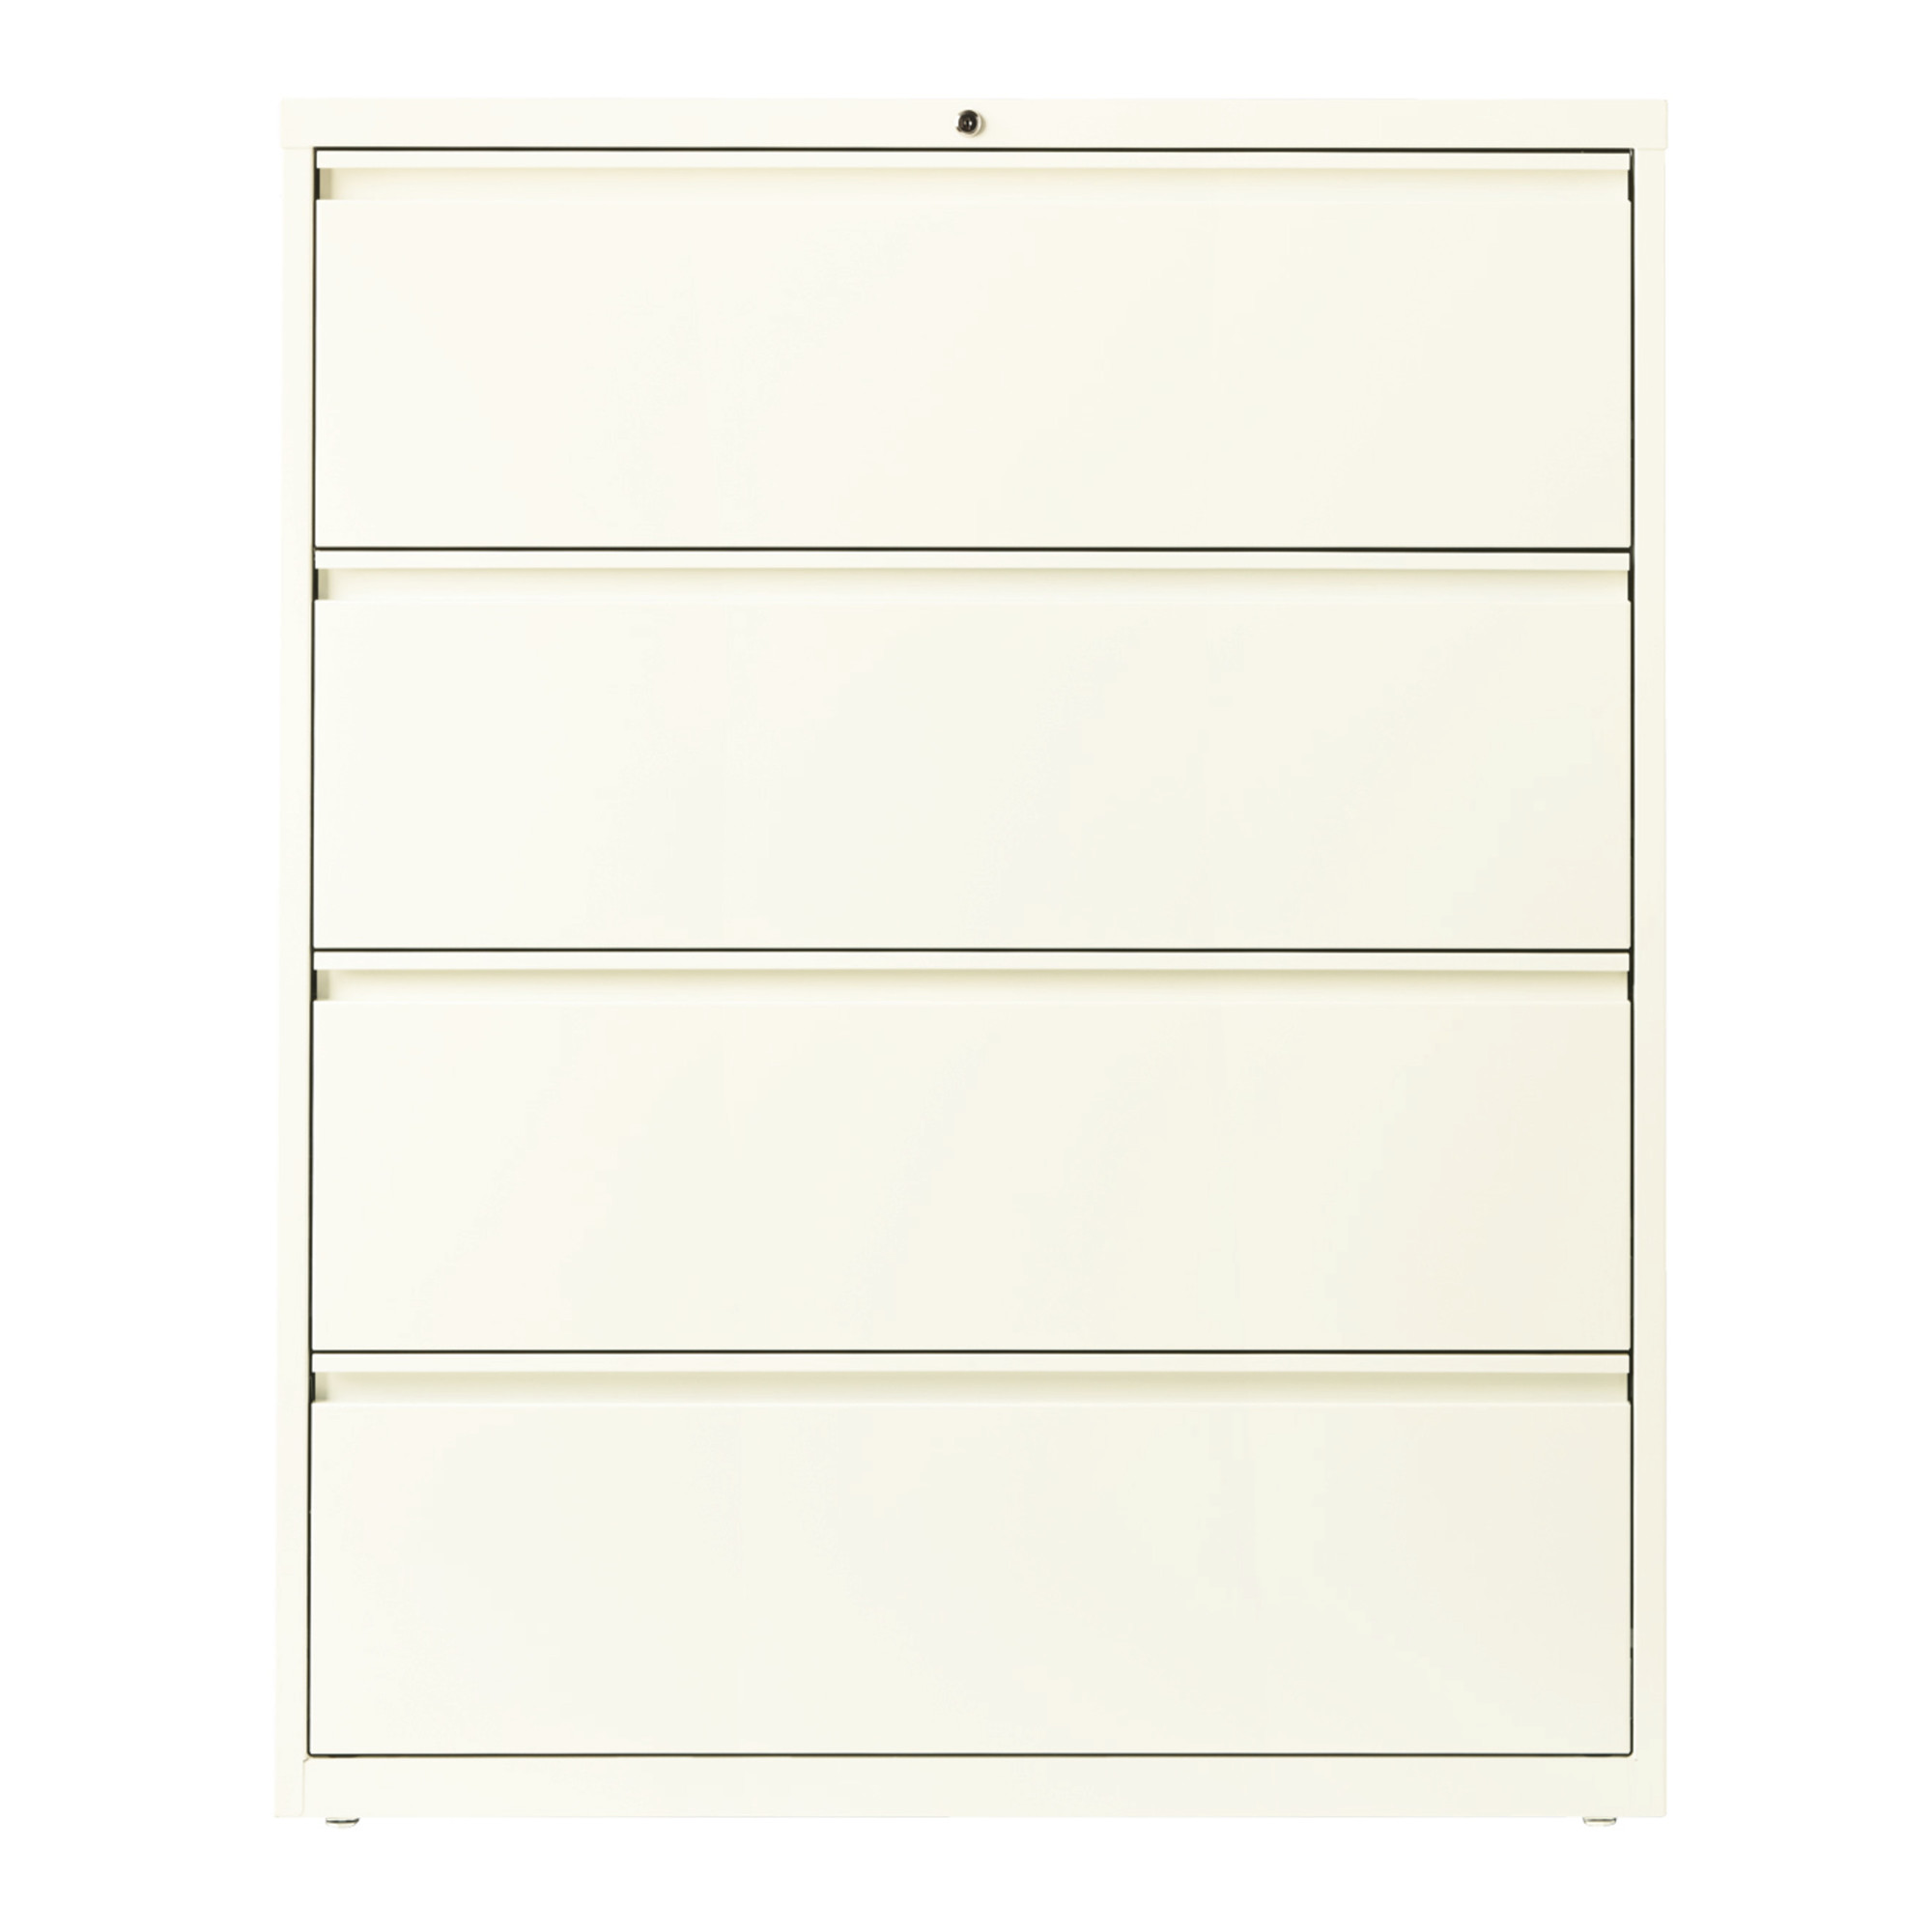 Hirsh Industries, 4 Drawer Lateral File Cabinet, Width 42 in, Depth 18.625 in, Height 52.5 in, Model 20664